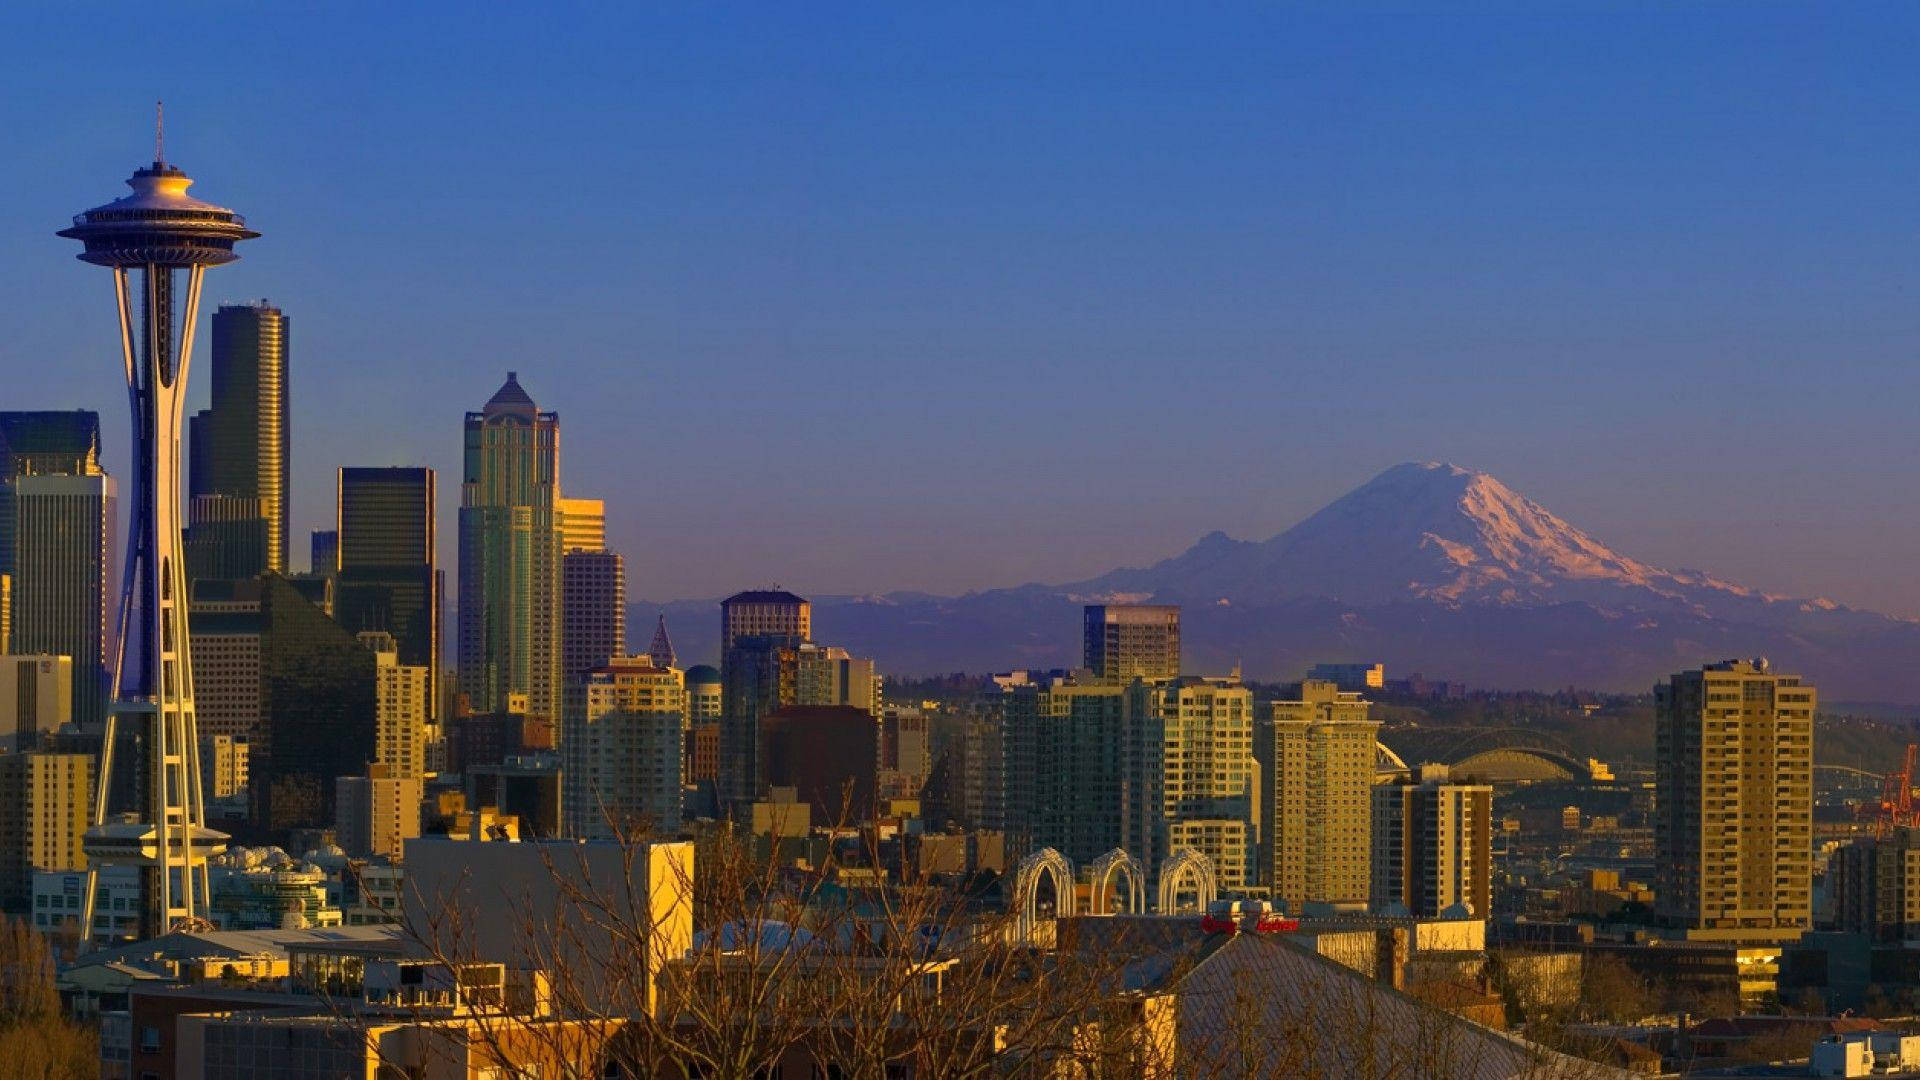 Buildings And Mountain In Seattle